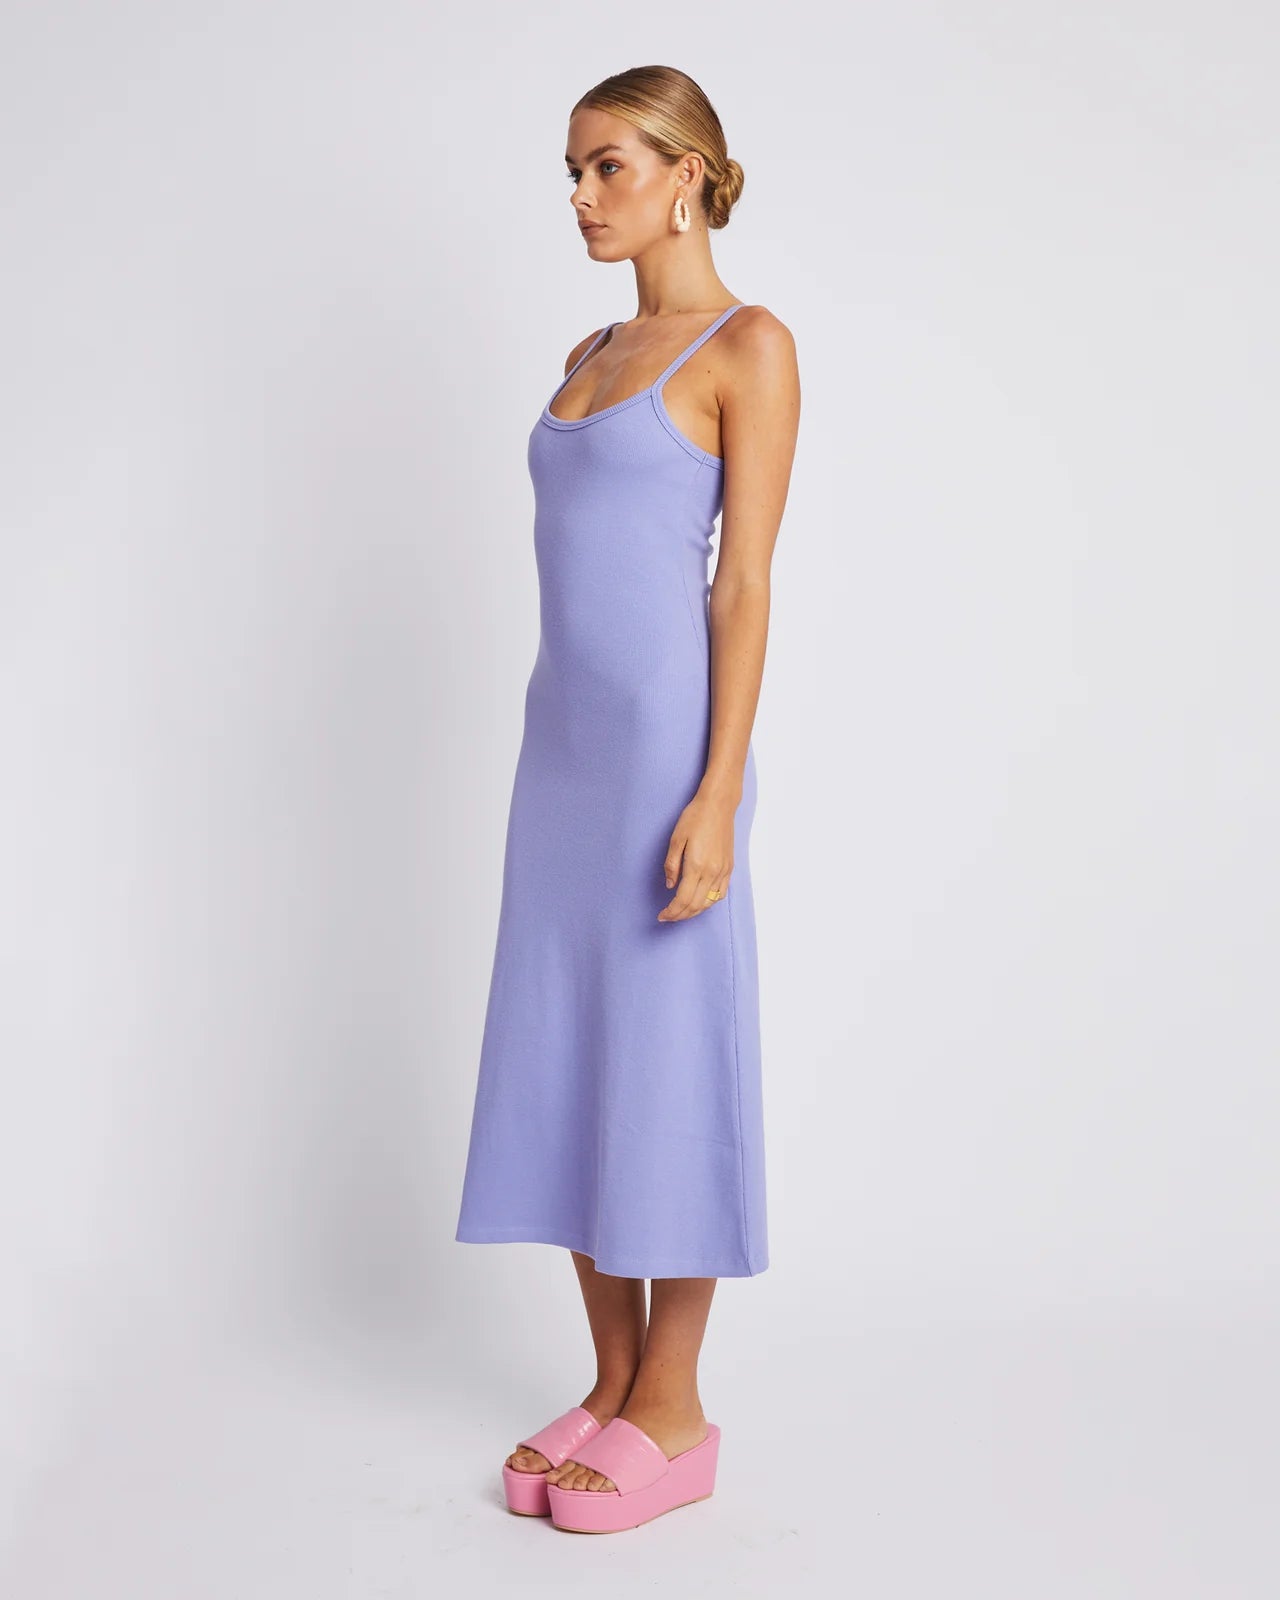 Look cool and feel comfortable in this A Line Midi Dress. With its thick ribbed cotton, it's form shaping, while keeping you comfortable. The midi length makes it perfect for any occasion. Get ready to look great in lilac.